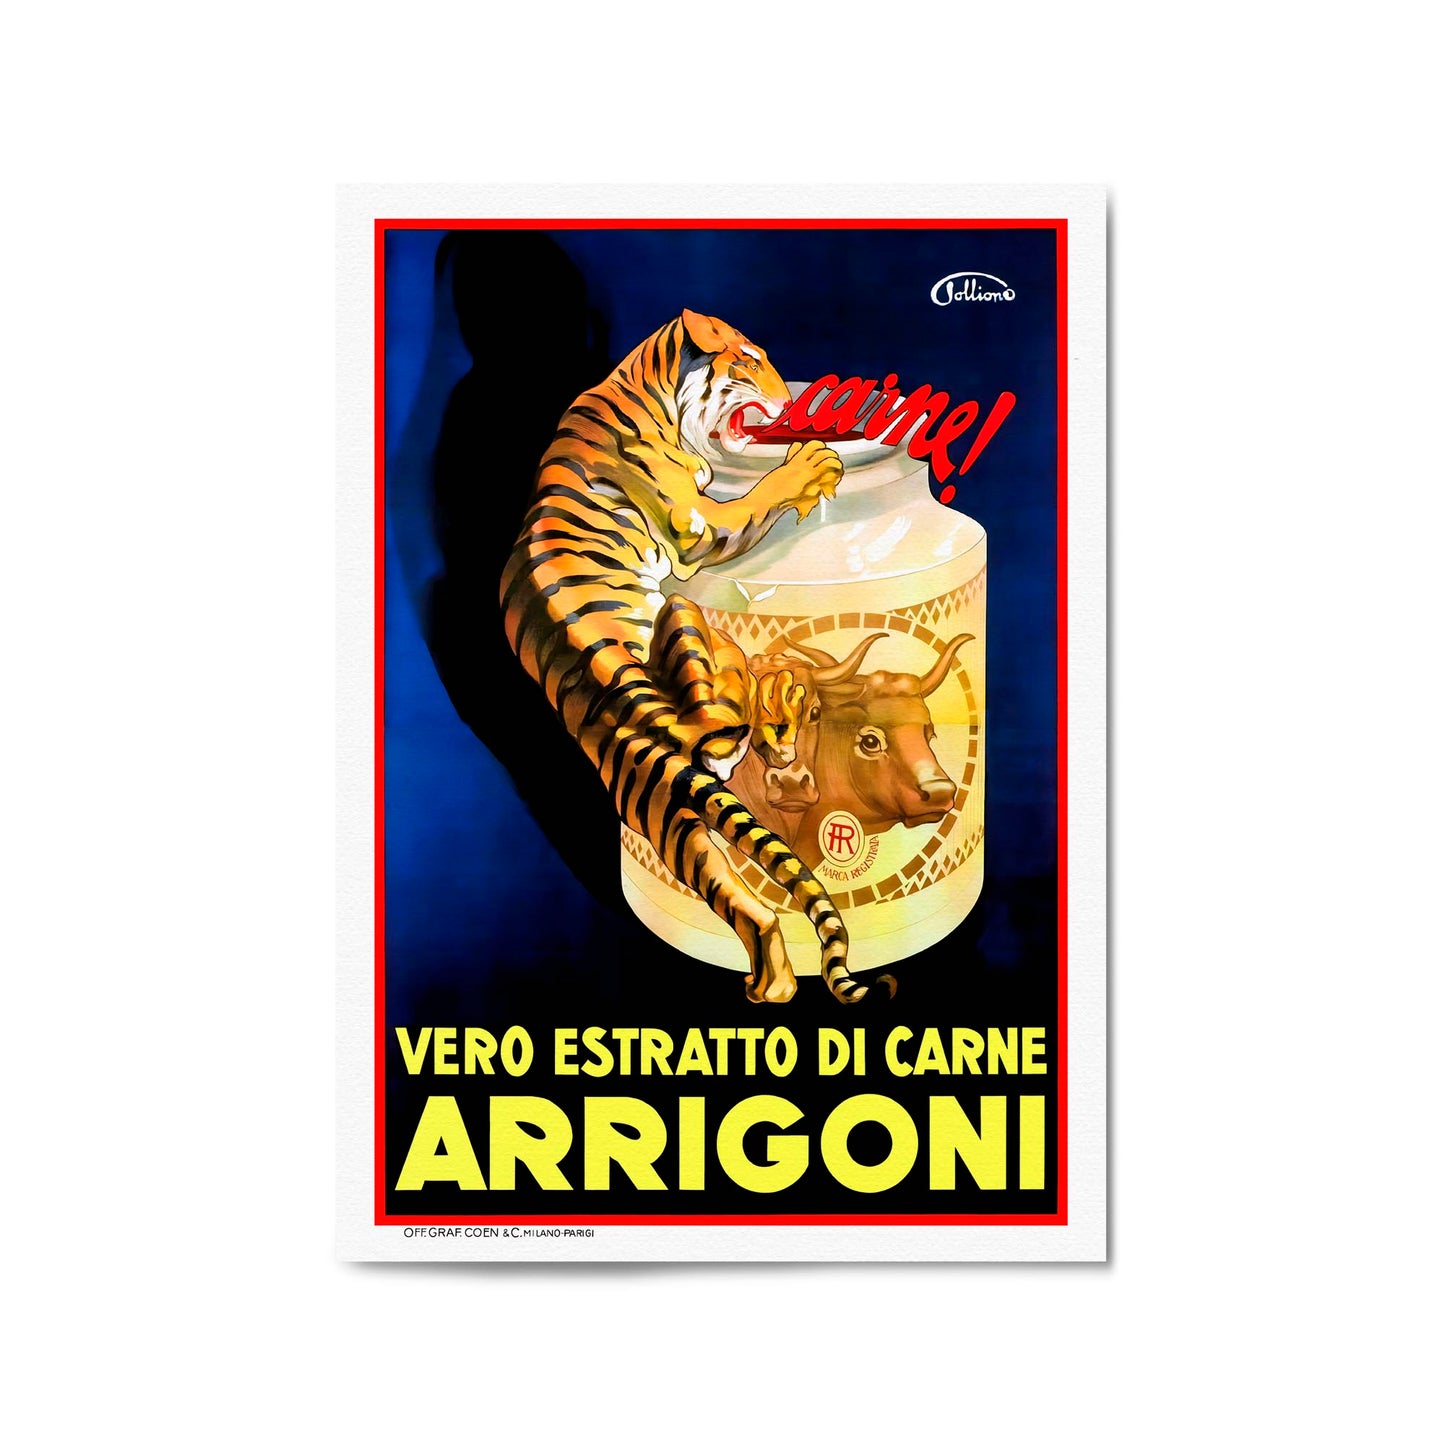 Arrigoni Meat Extract by Sigon Pollione | Framed Vintage Poster